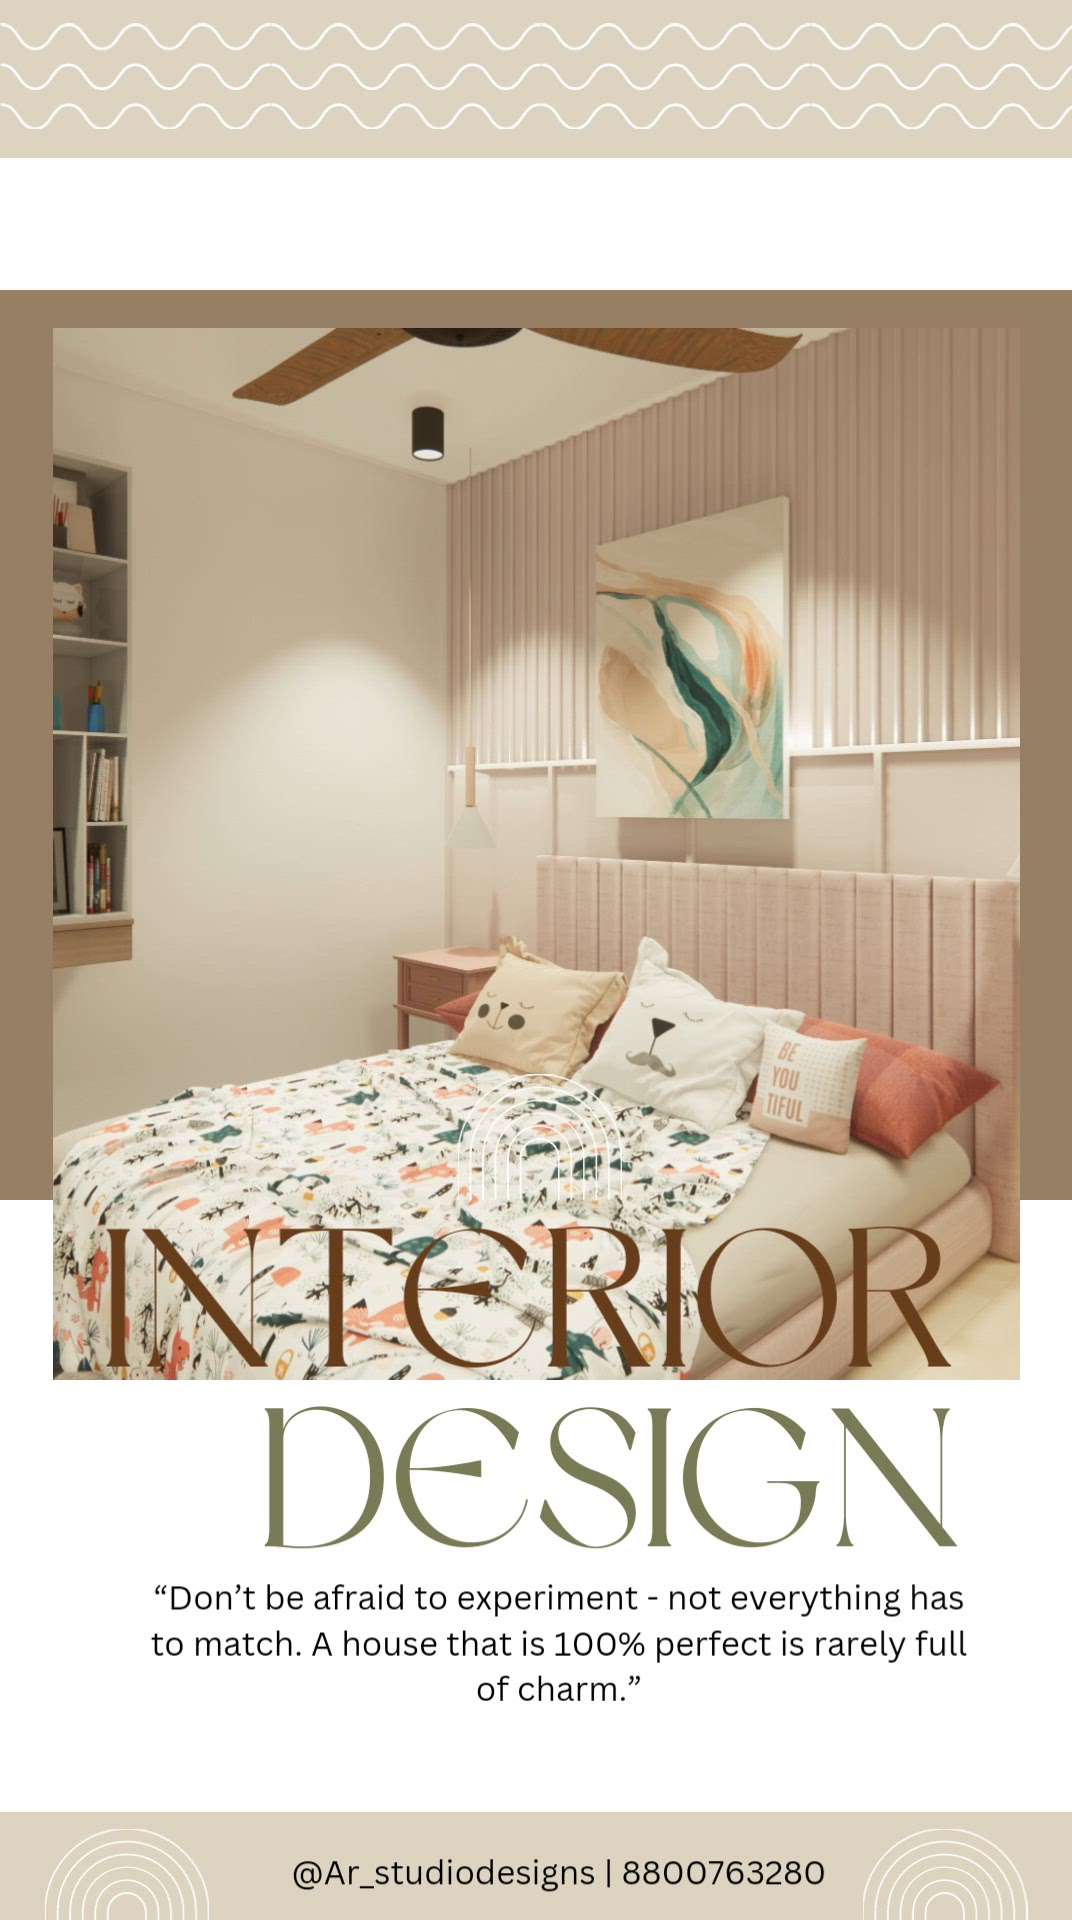 interior design

want to design your space feel free to reach us
contact details: 
gmail id A.rajputdesignstudio@gmail.com
contact number: 8800763280 | 9958932353.

#InteriorDesigner #HouseDesigns #LivingroomDesigns #kidsroomdesign